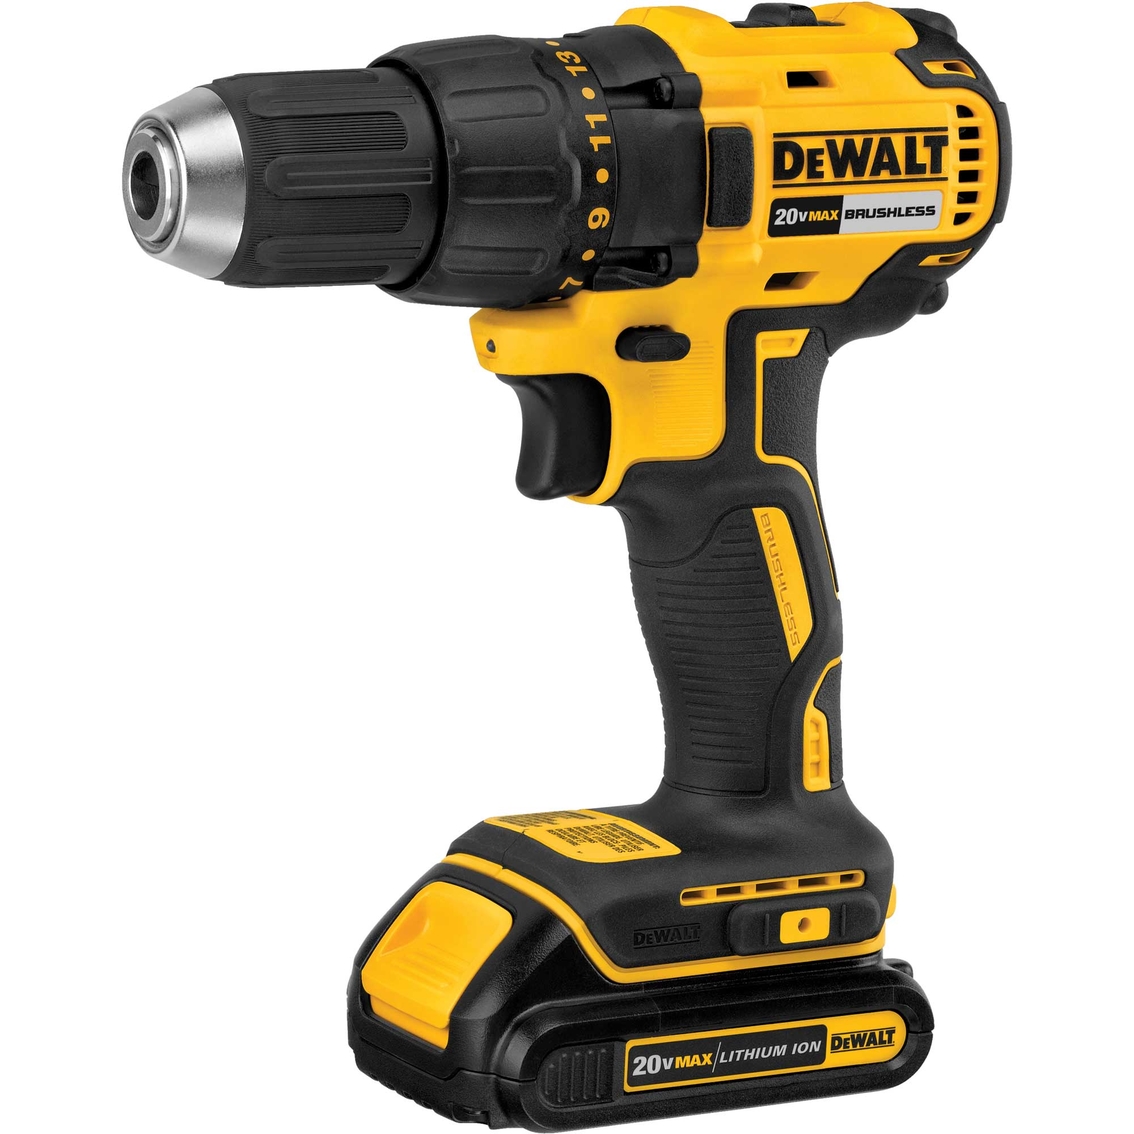 DeWalt 20V MAX* Compact Brushless Drill/Driver - Image 2 of 3